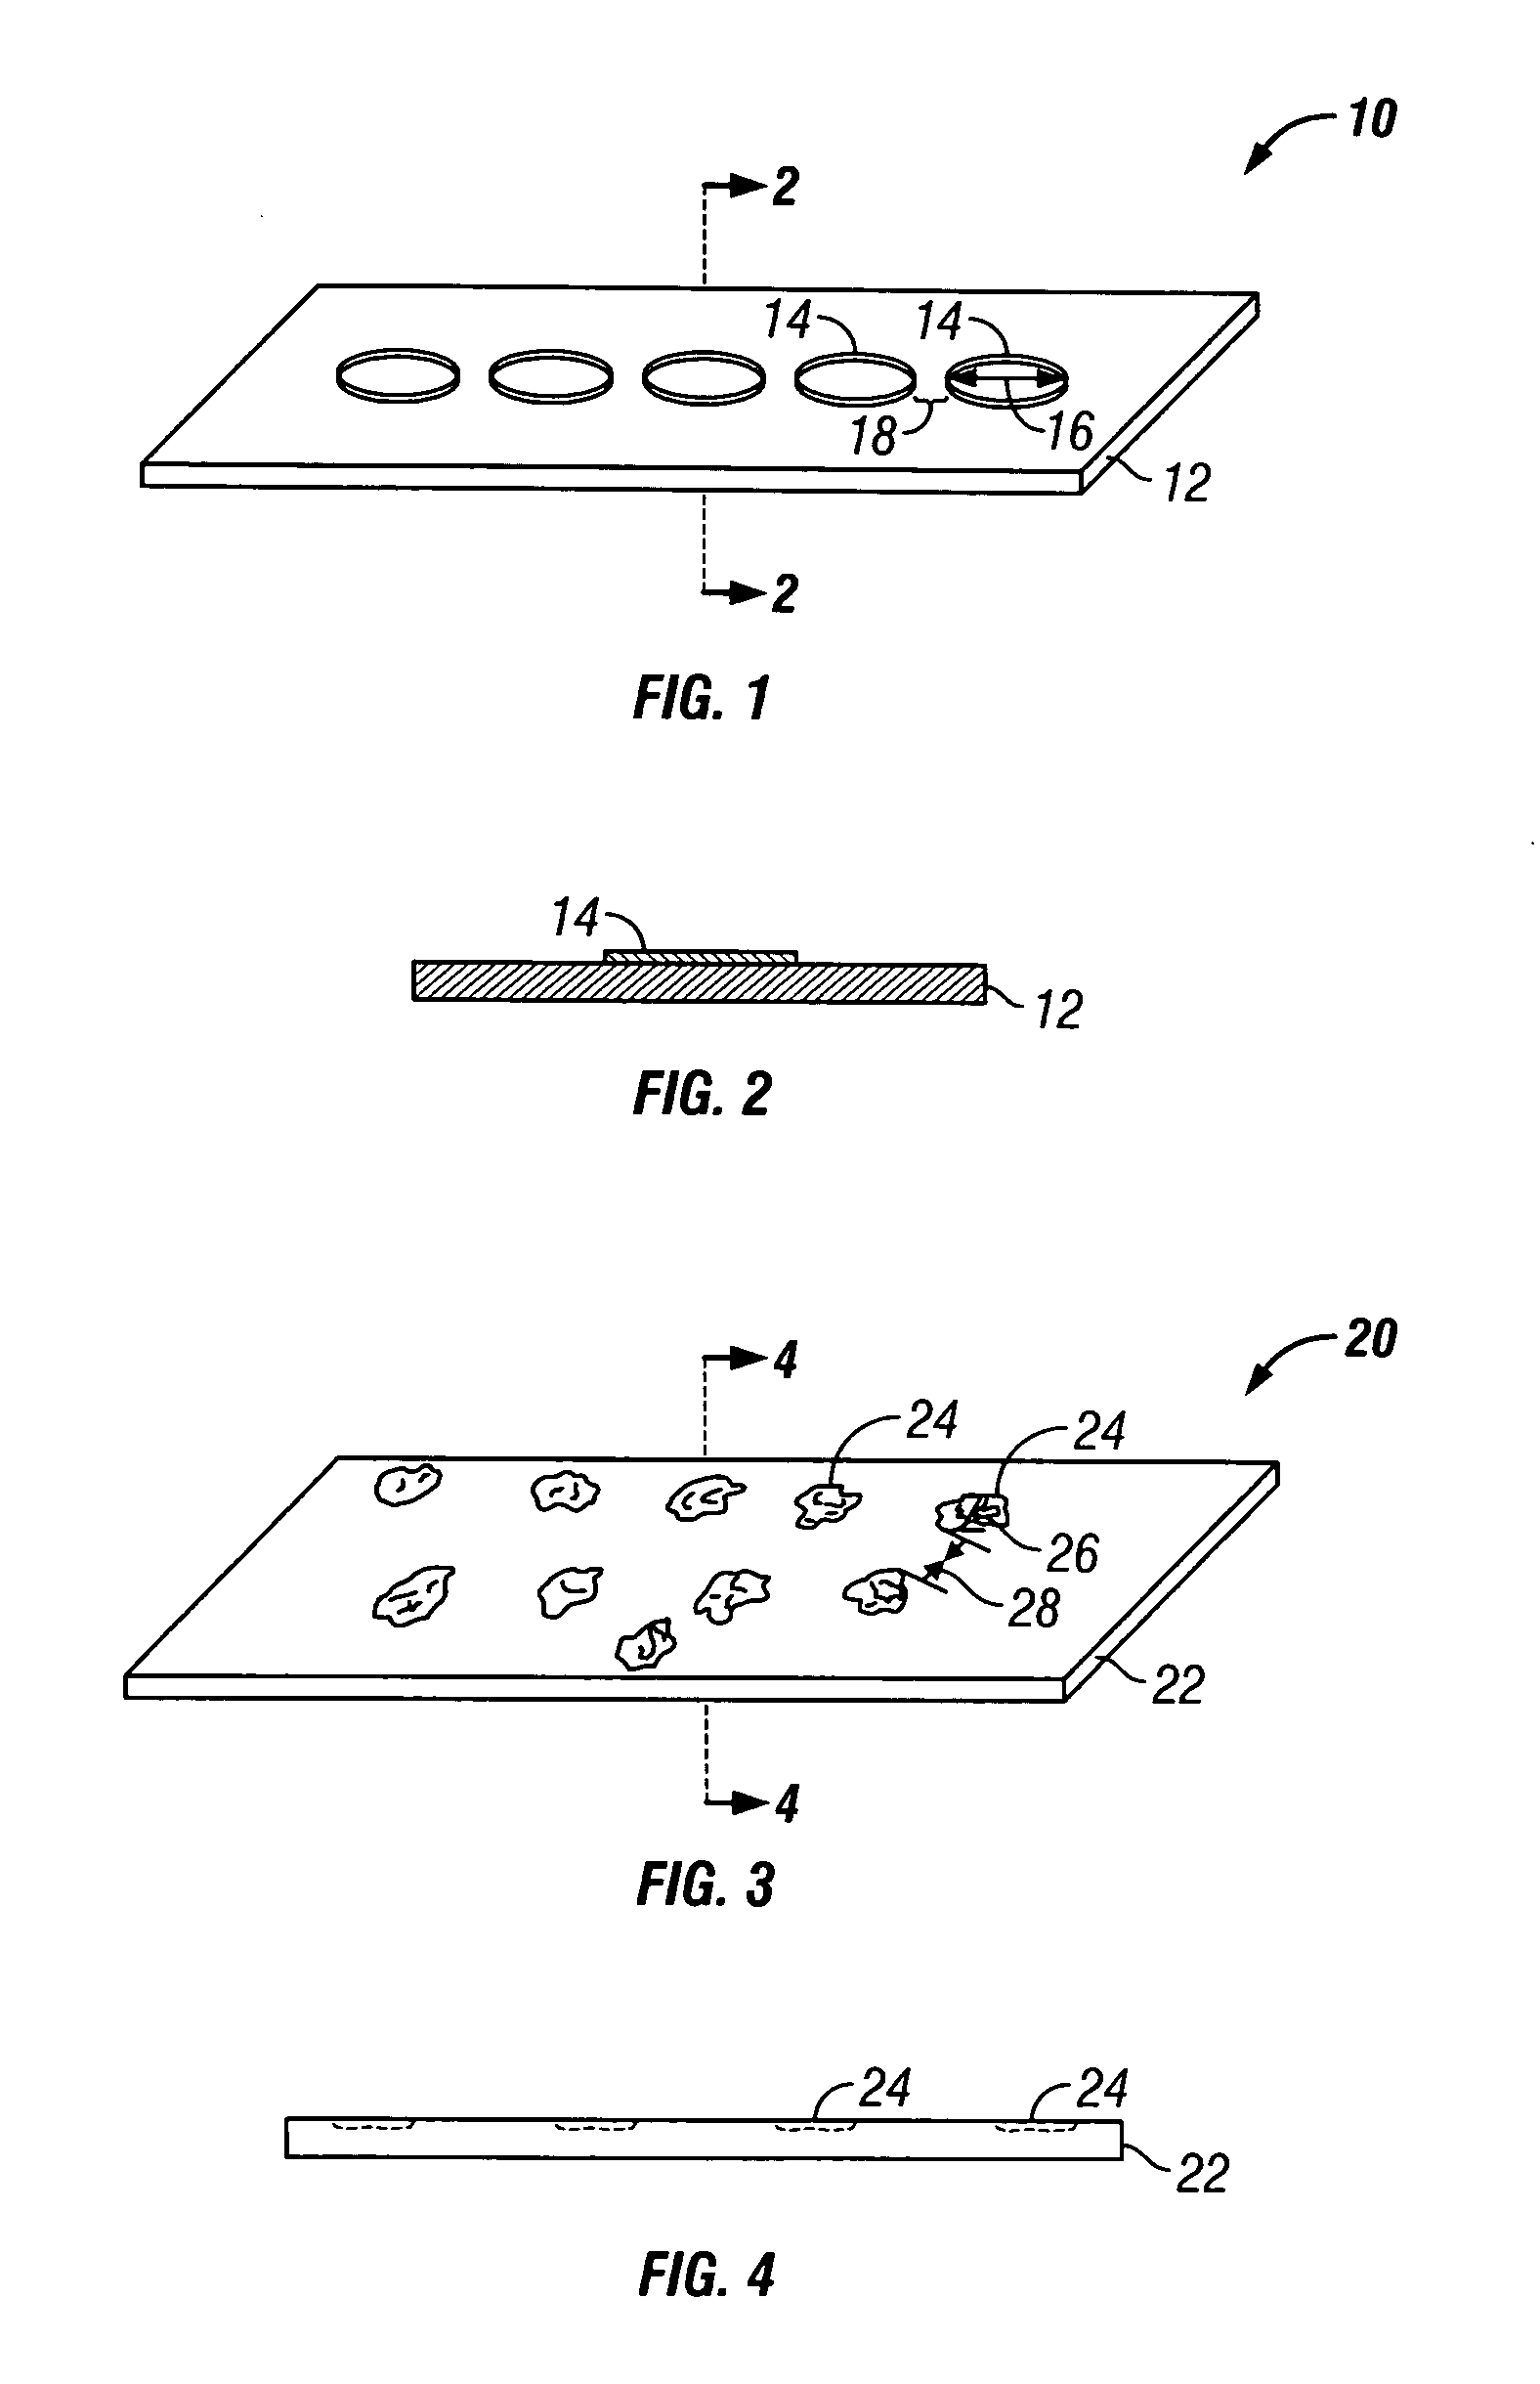 Implantable materials having engineered surfaces and method of making same